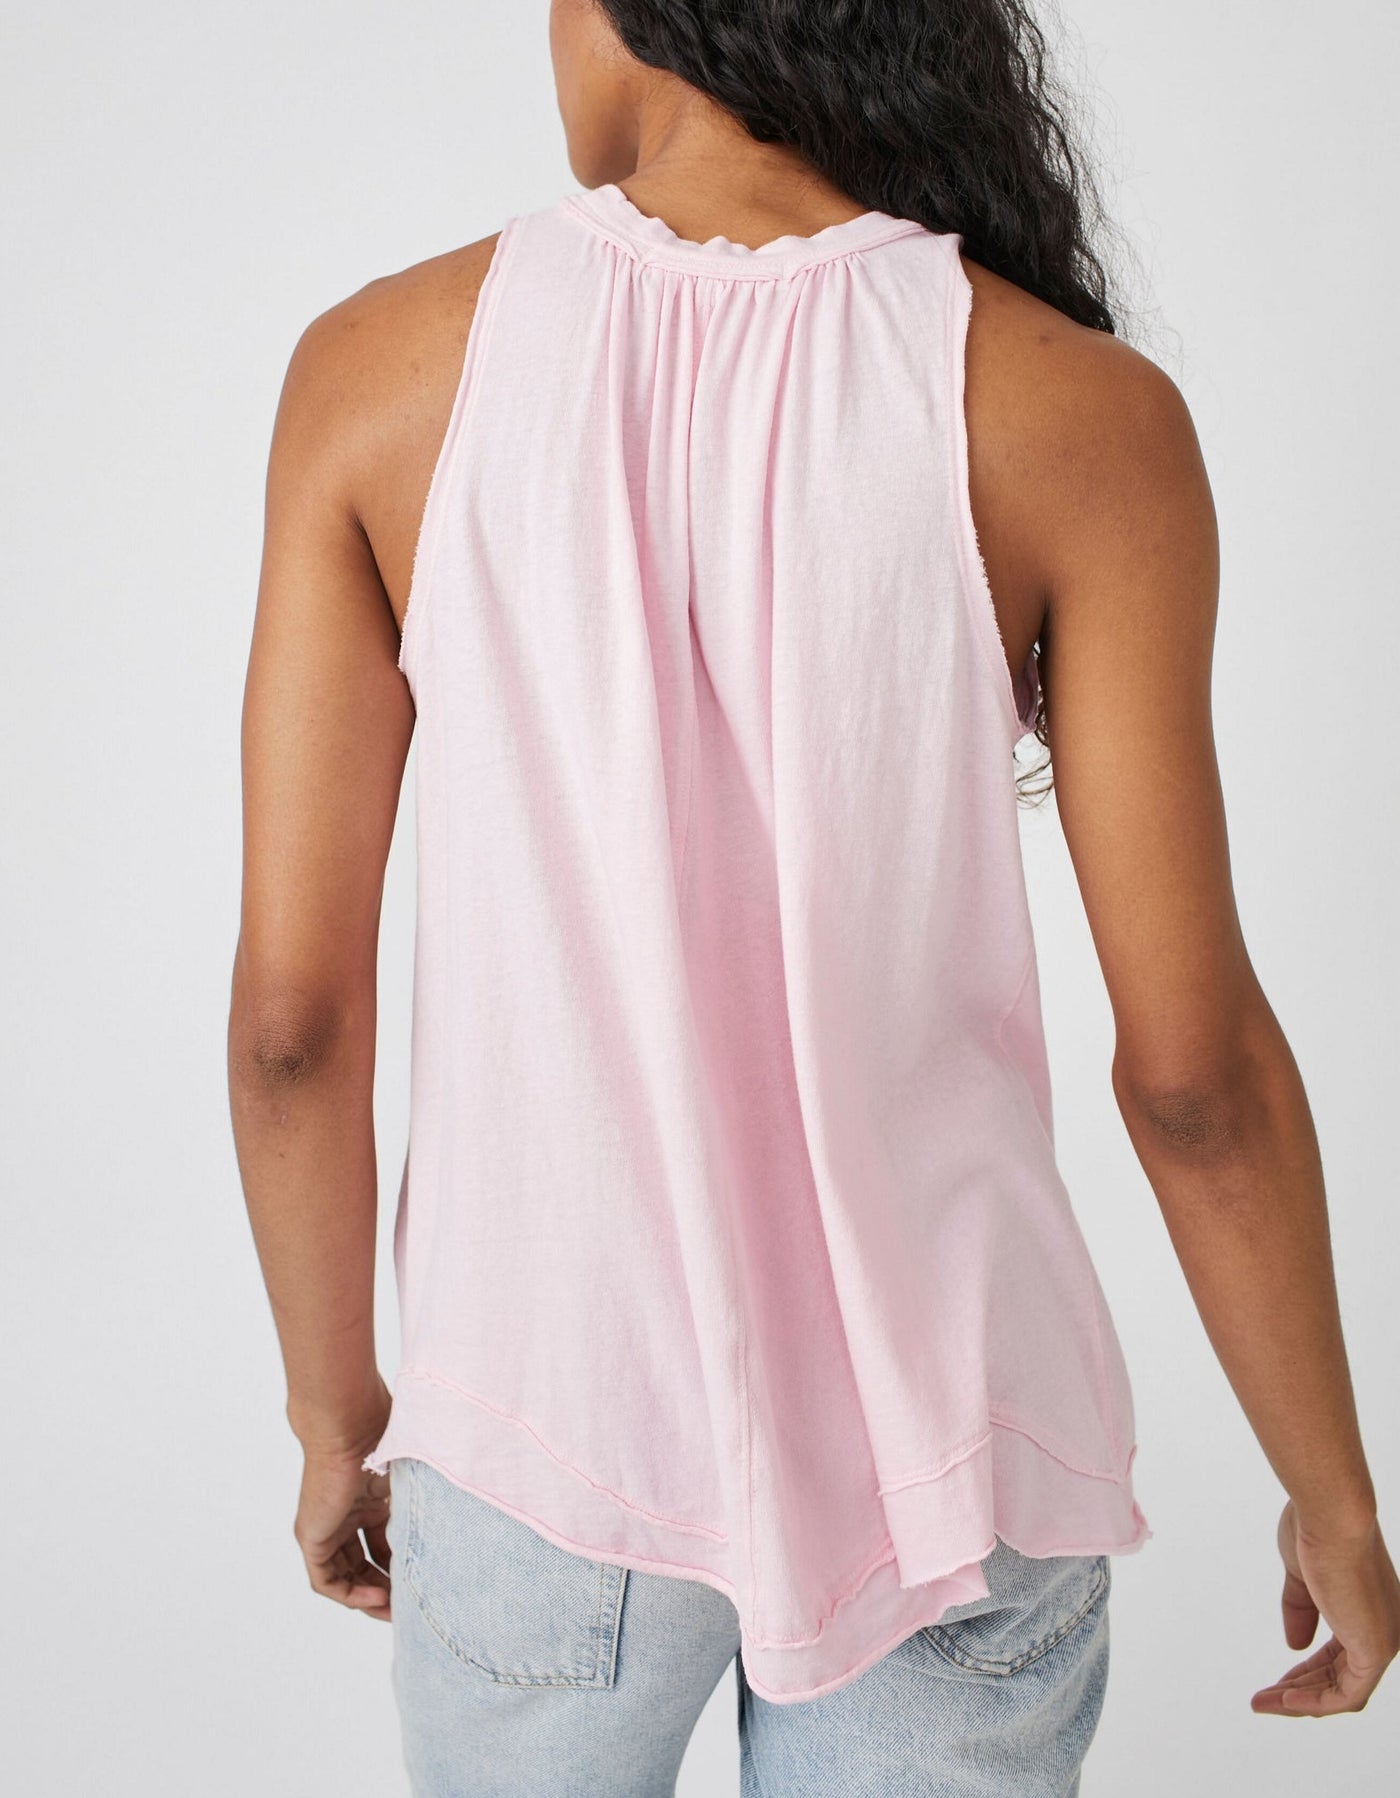 Pleated Tank // Pink Lemon This high-necked Pleated Tank in Pink Lemon is both effortless and essential. Wear it with your laidback look, or layer it up to build an outfit. Its relaxed, slouchy fit features pleating at the bust and dropped armholes, while subtle distressing at the hems complete the timeless, lived-in look. Embrace effortless style with this versatile and cool classic tank.   Hand Wash Cold  Measurements for size small Bust: 41 in Length: 28 in  Contents 100% Cotton